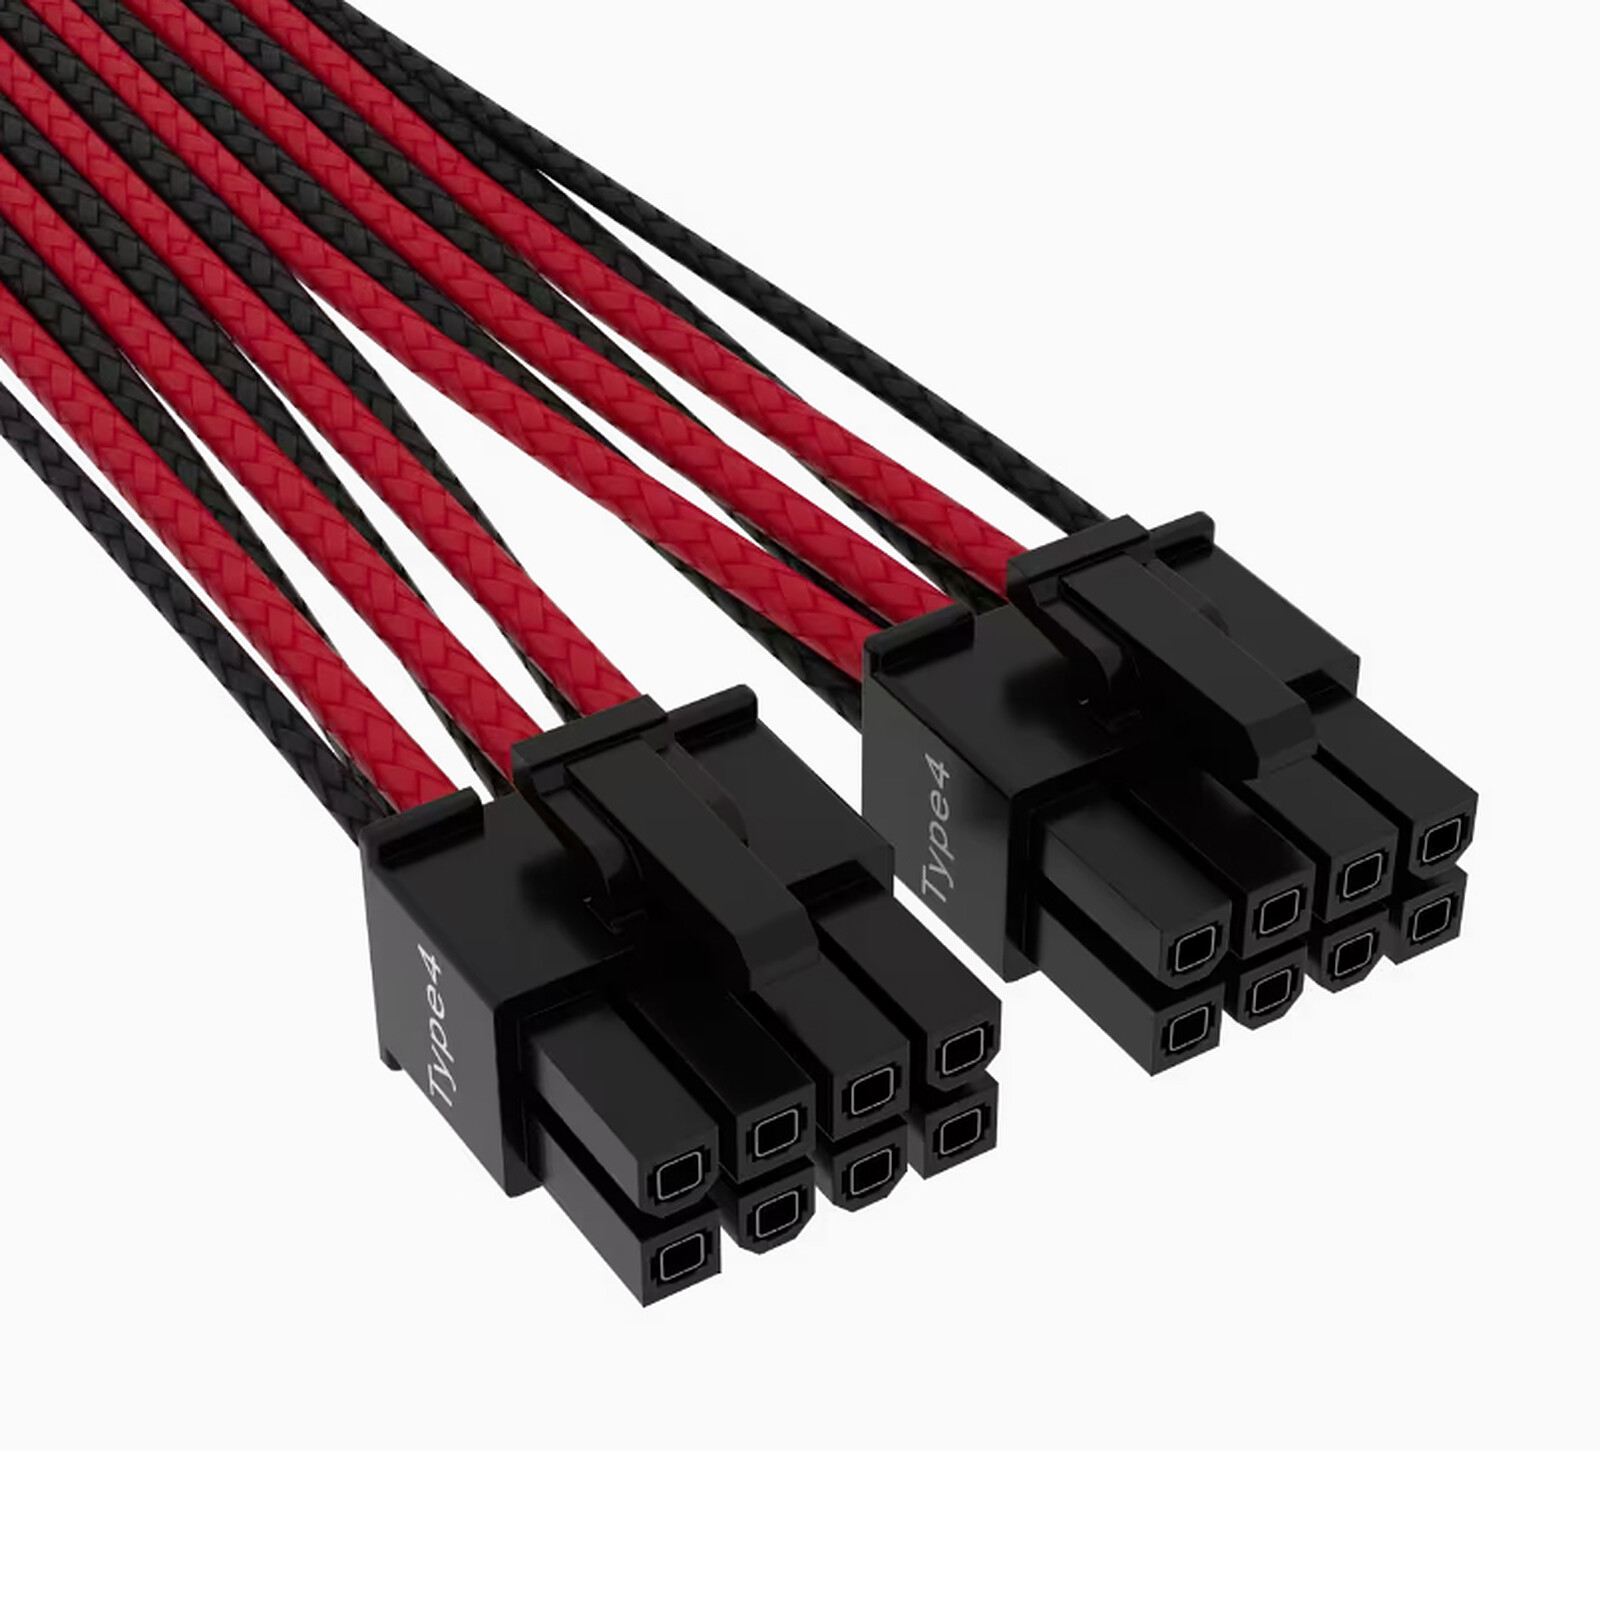 Need Extra CPU Power Cables for Corsair PSU: Make These Easy Upgrades